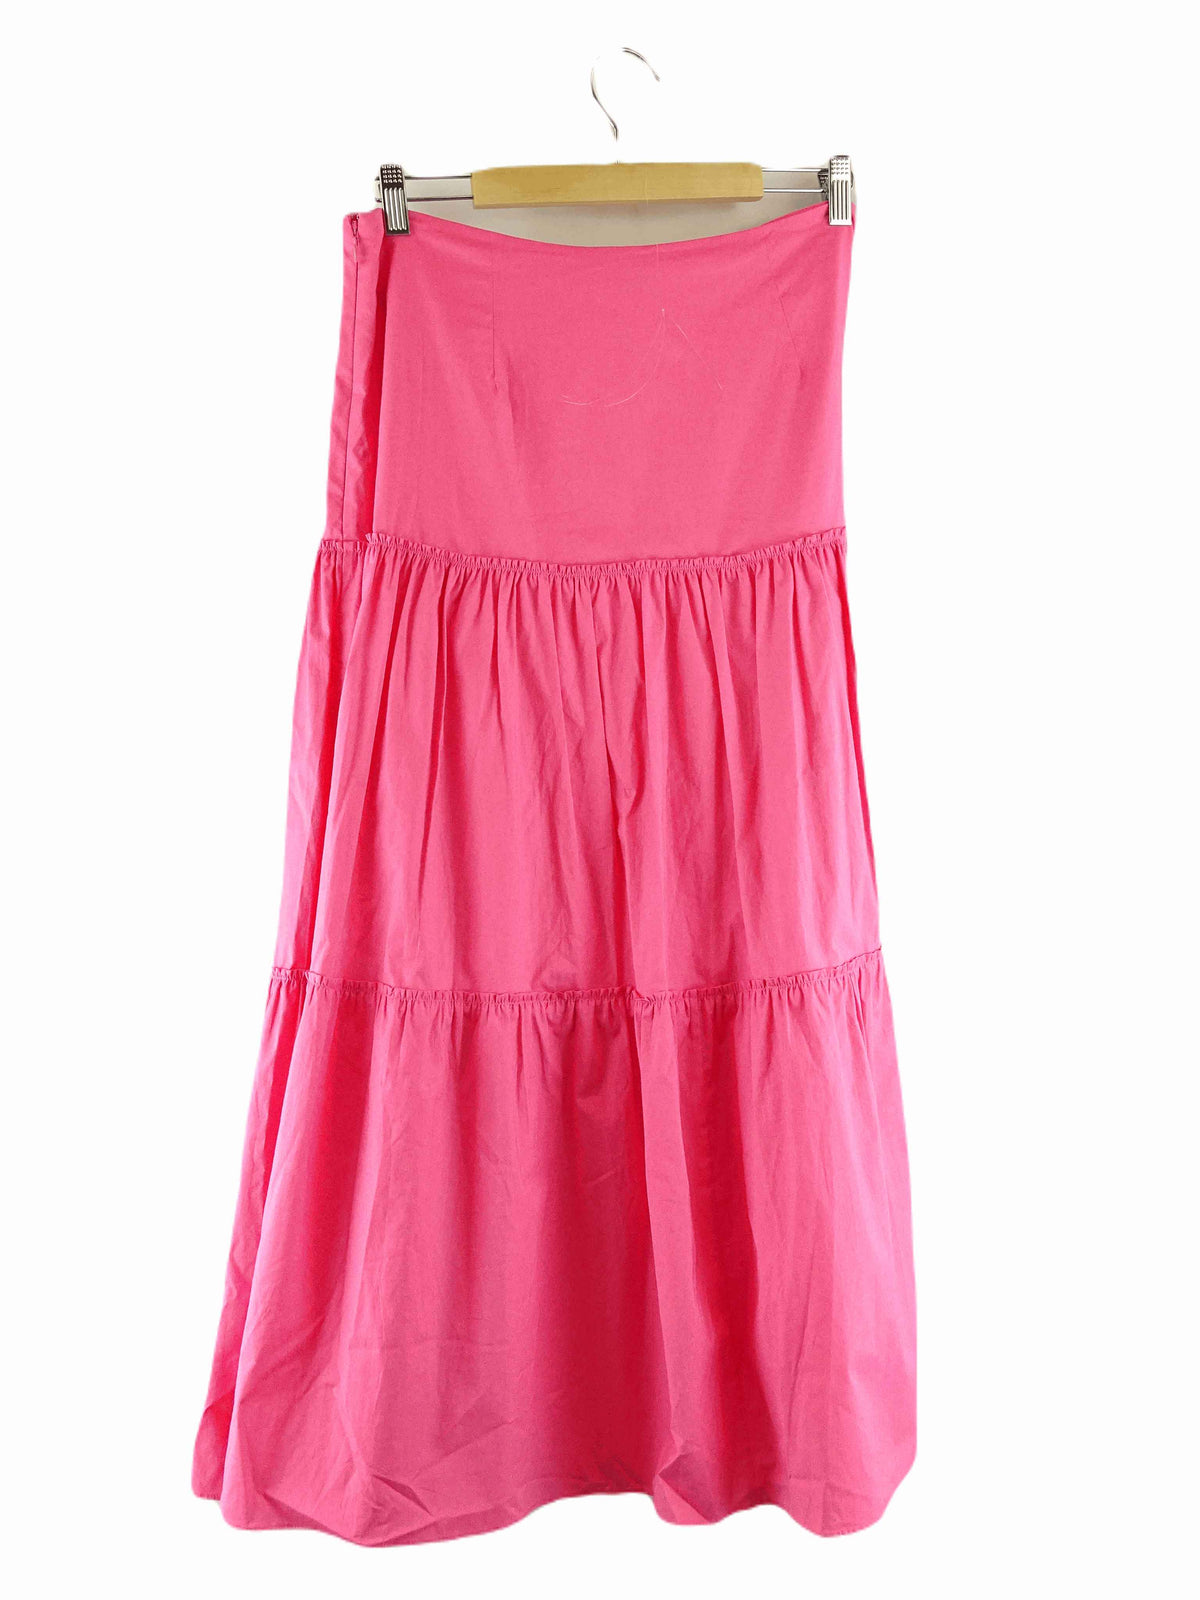 Witchery Pink Skirt 10